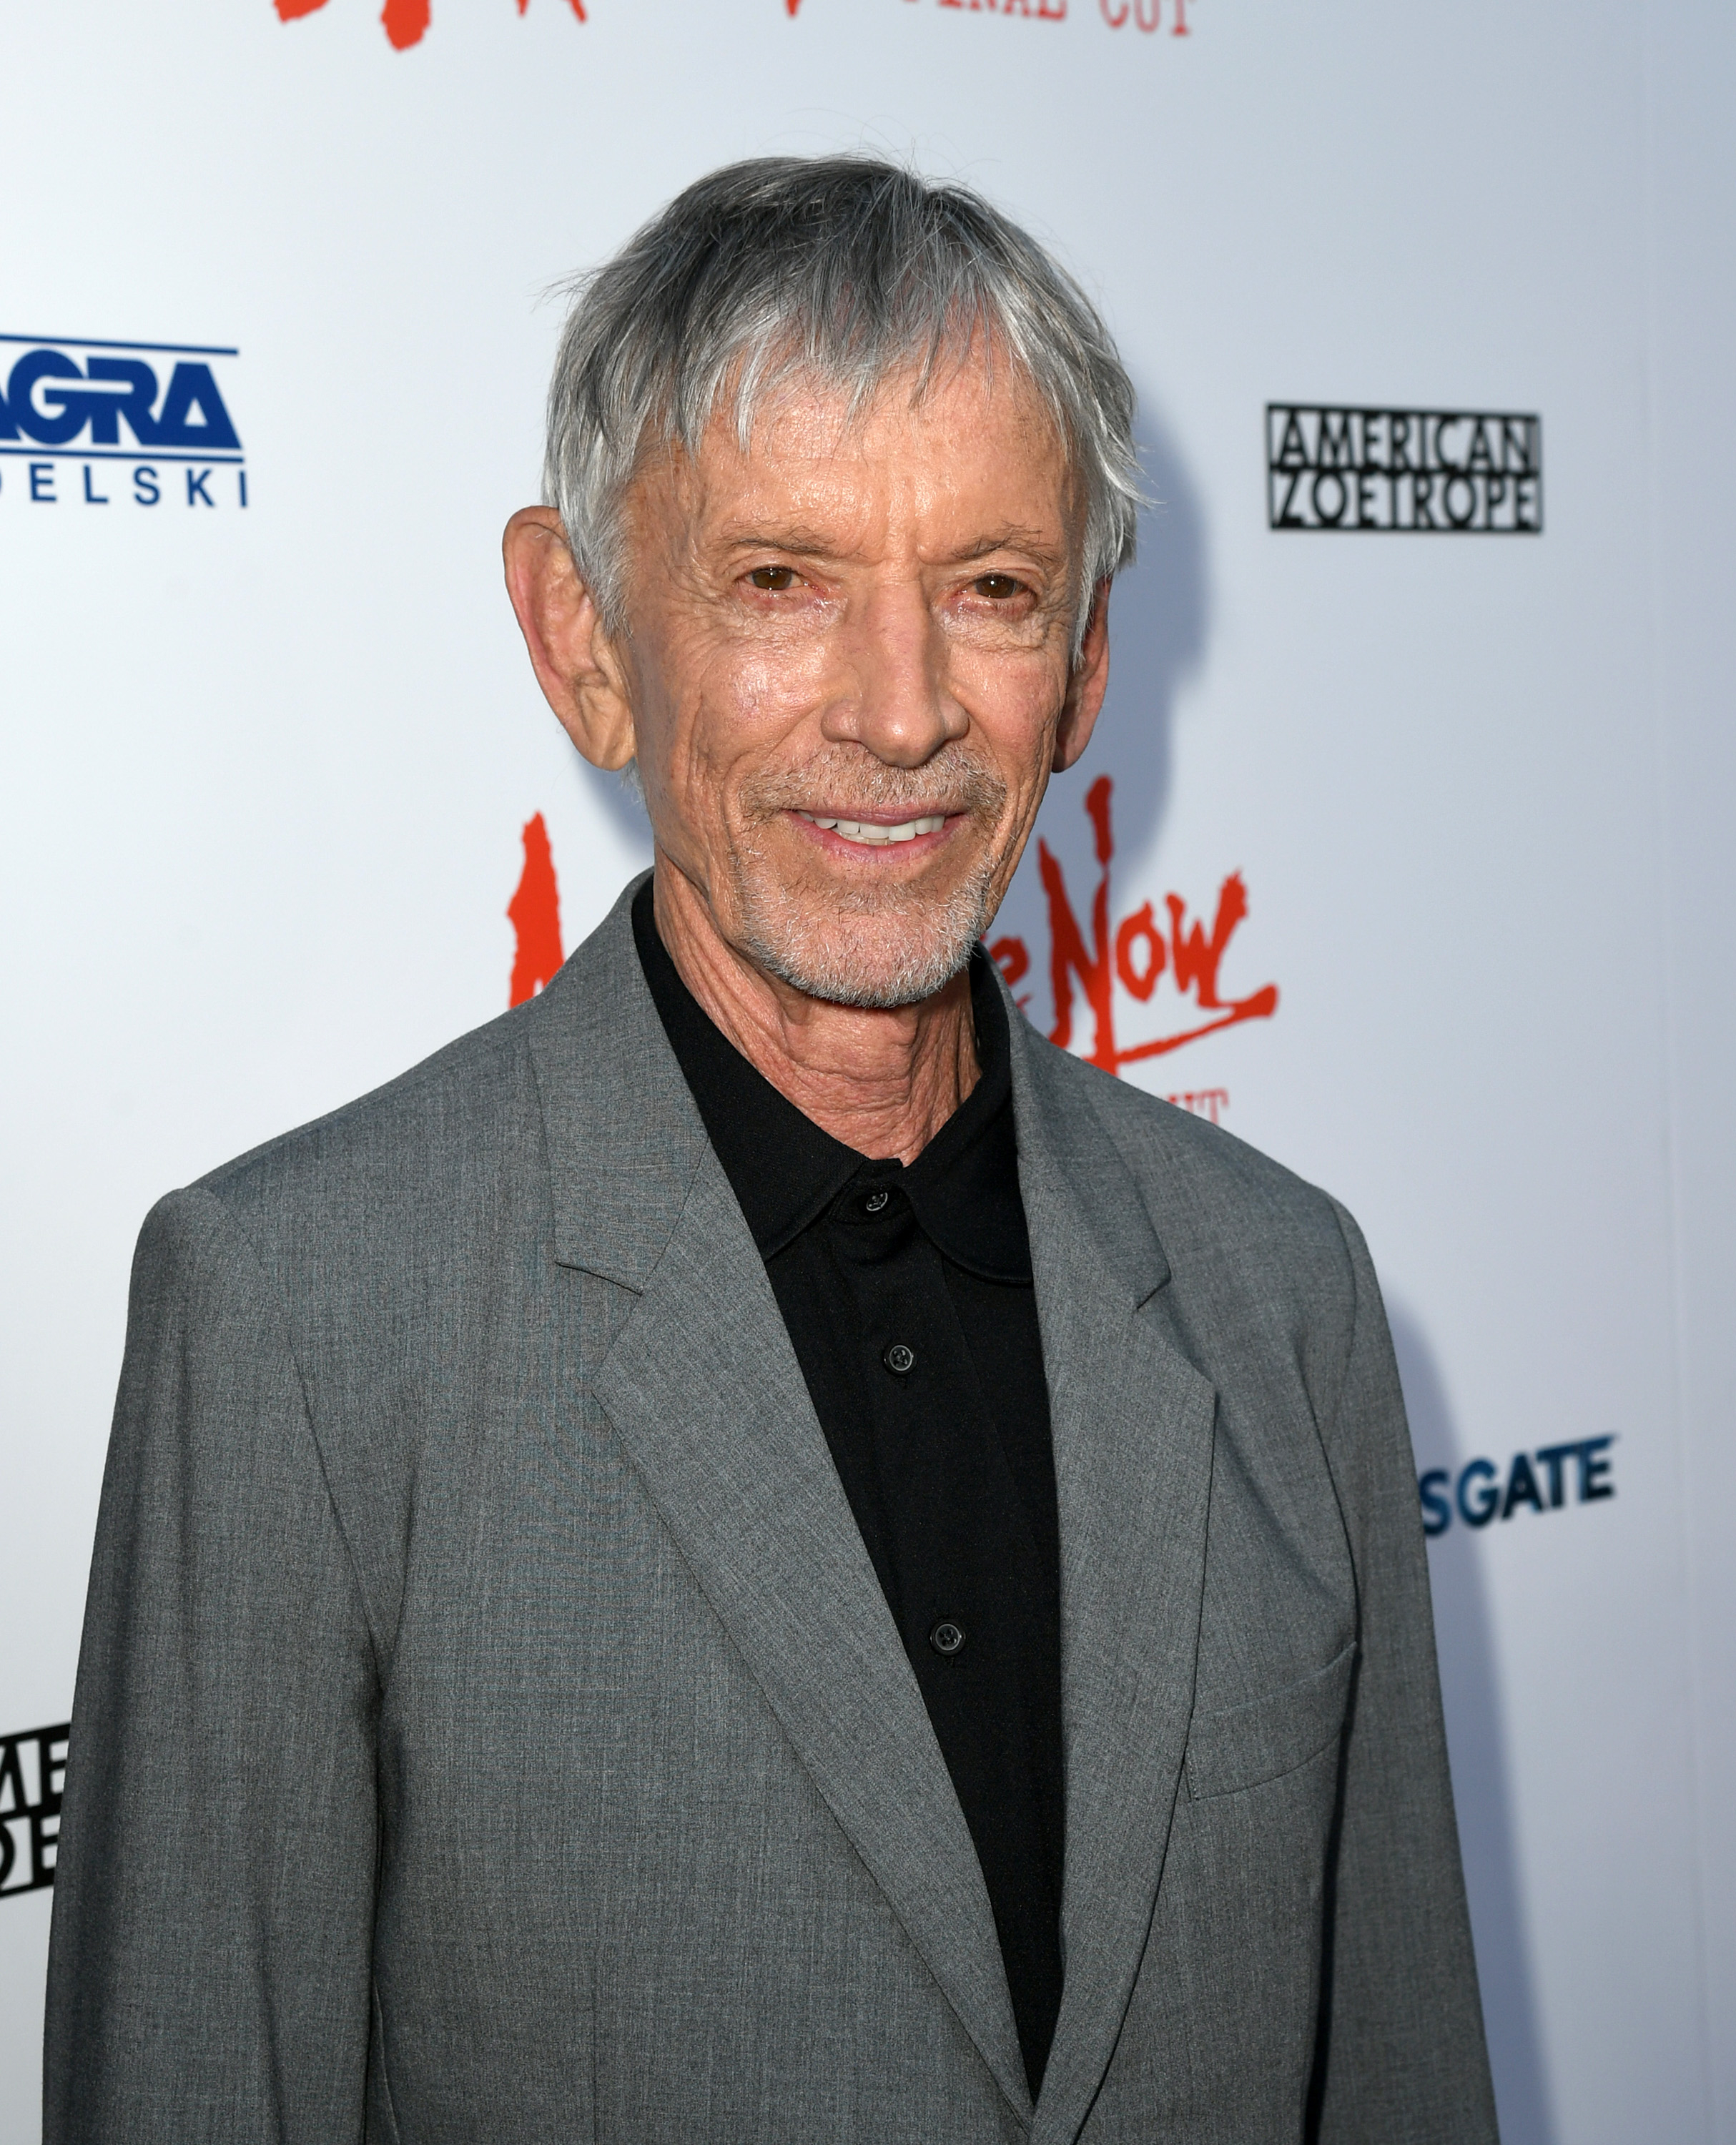 Scott Glenn in a structured grey suit at a film premiere